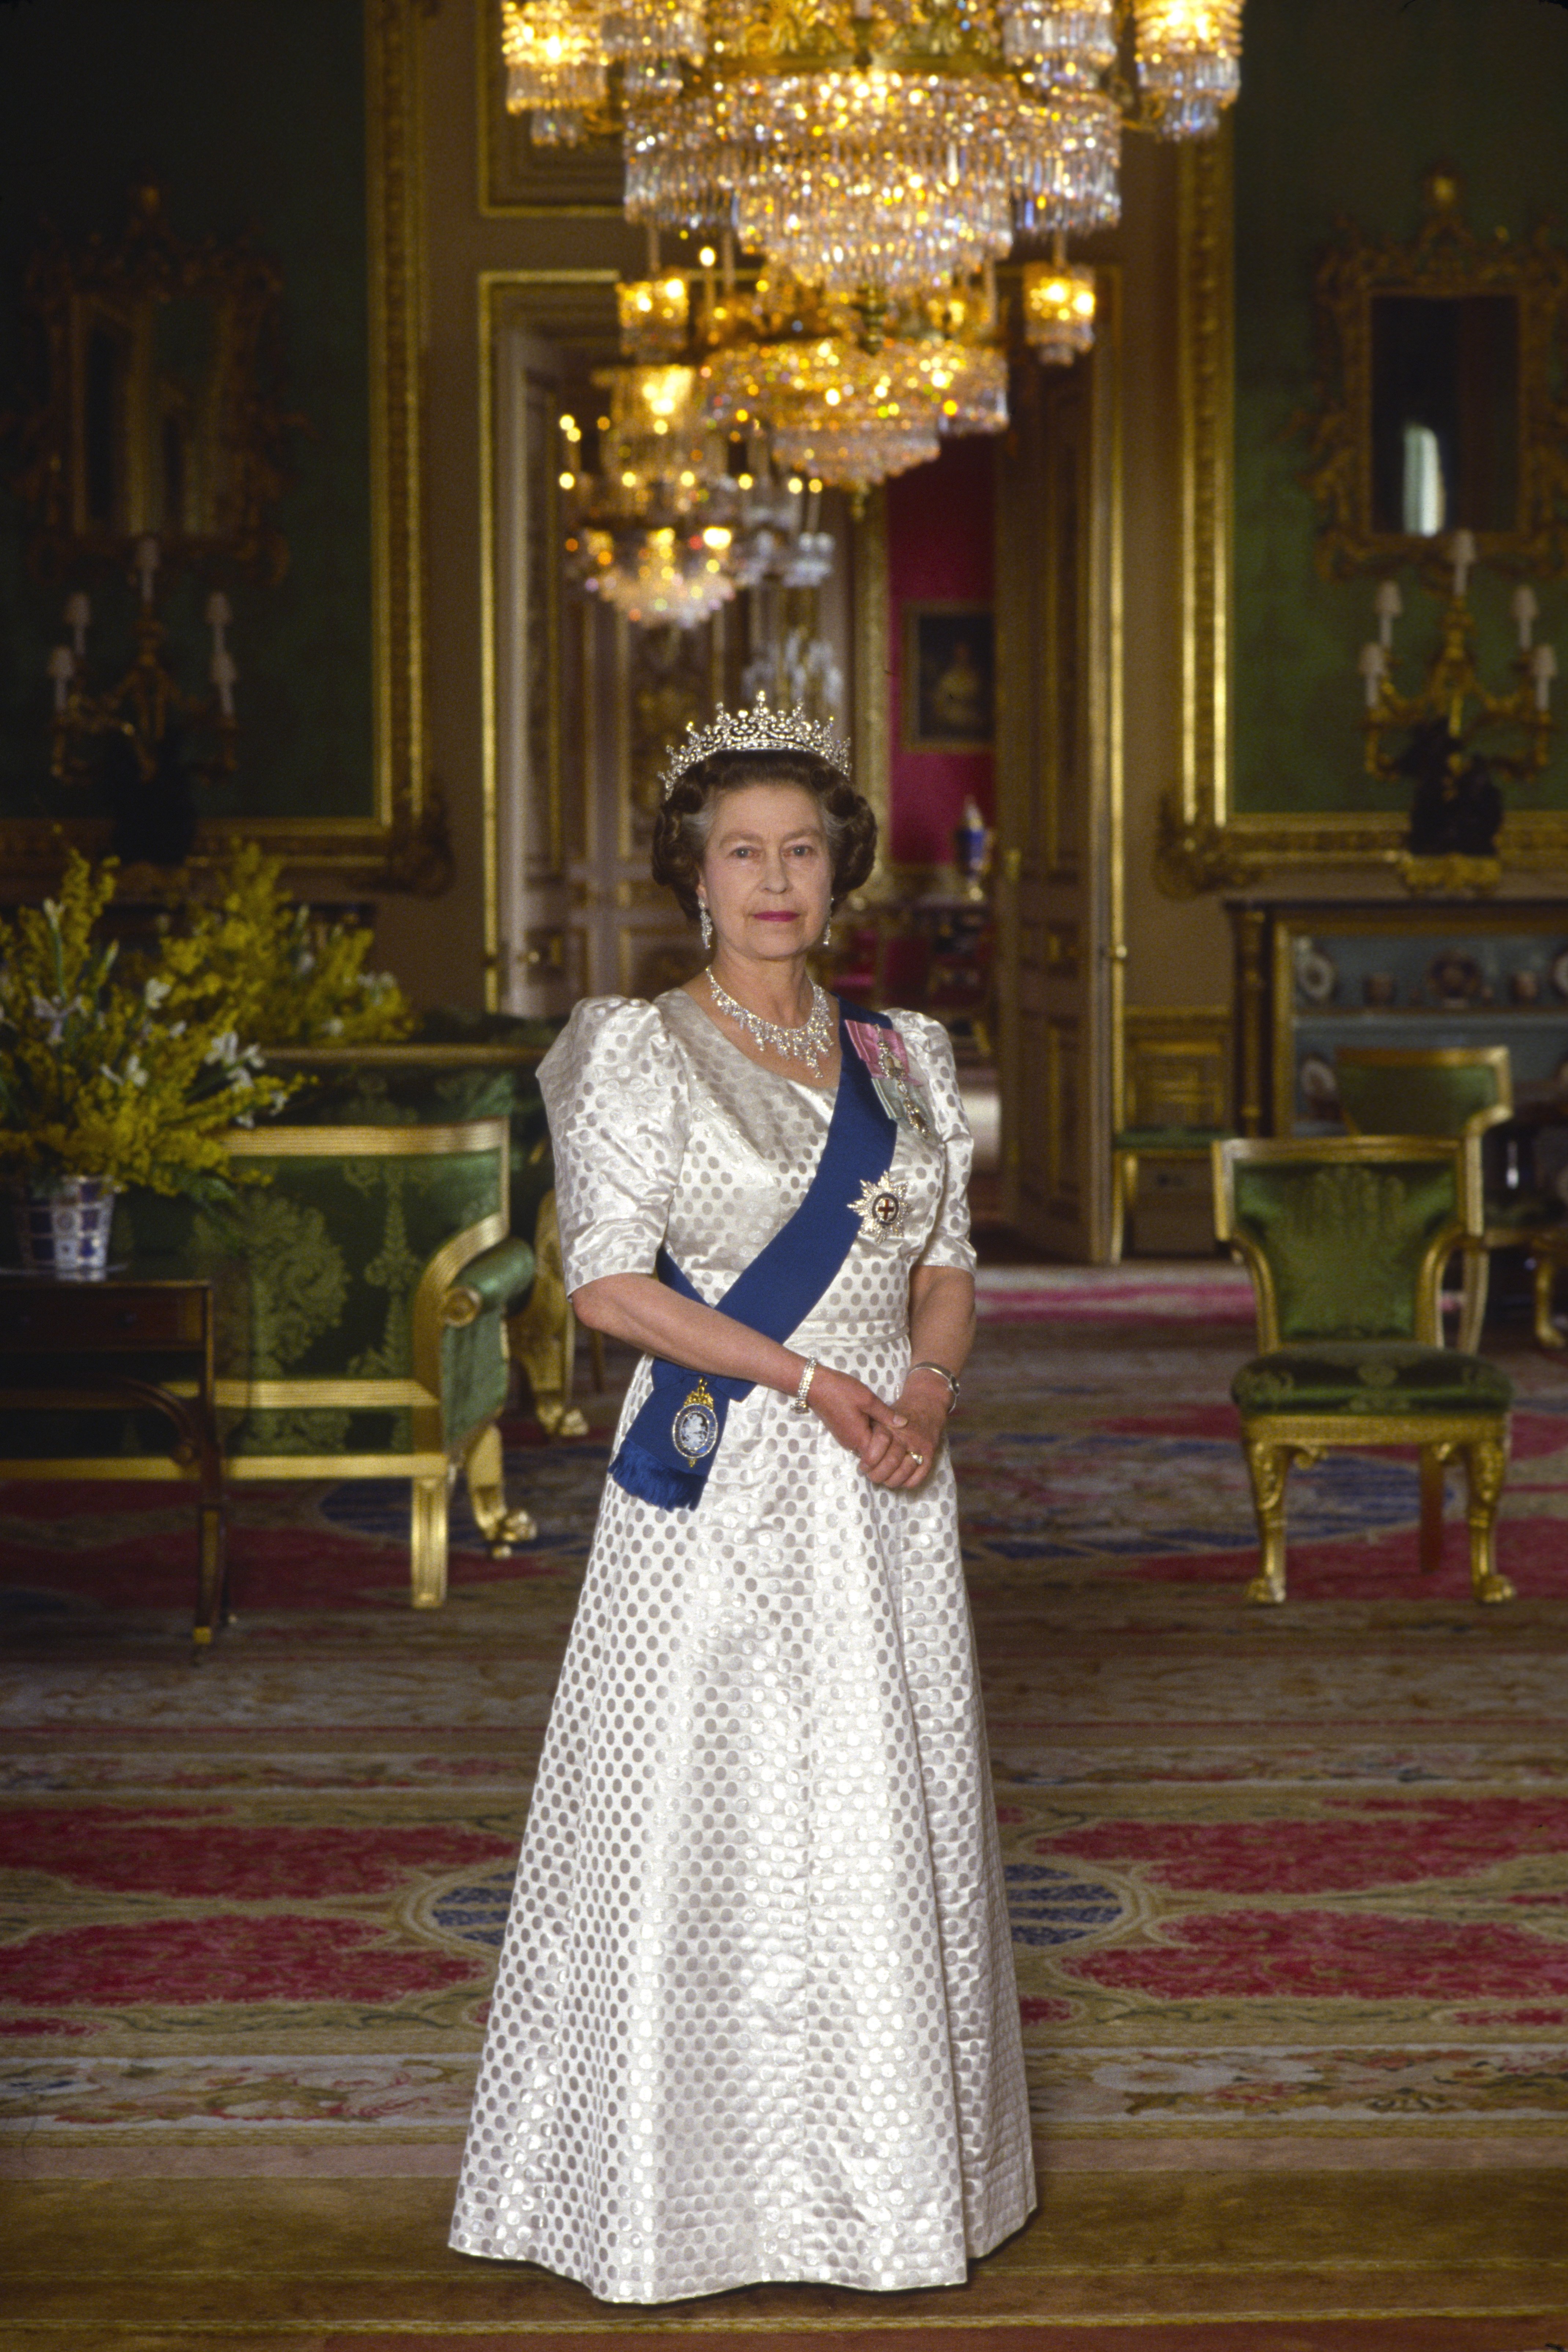 The Queen In The Green Drawing Room At Home In Windsor Castle. | Source: Getty Images